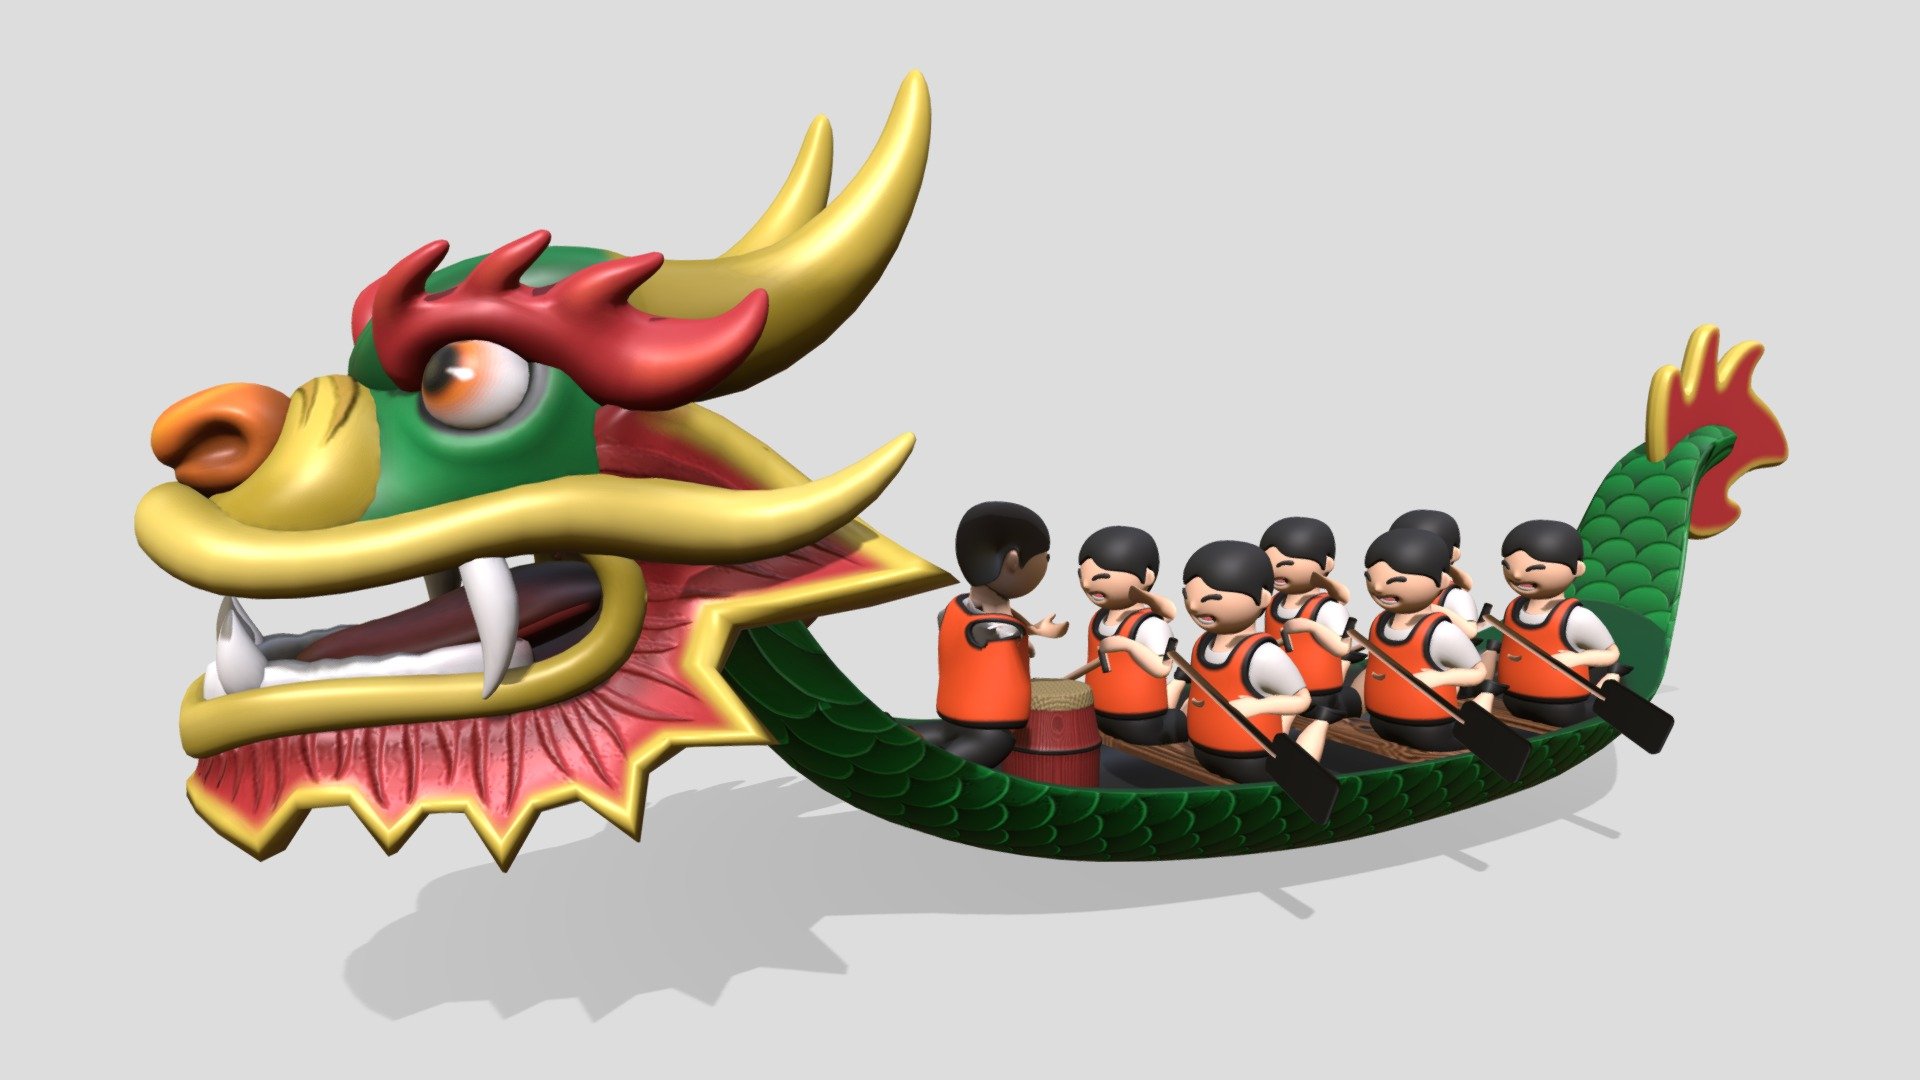 Stylised Dragon boat with 6 rowers and a drummer. Includes oars and drum. 
Animations included: Rowers paddling (Loop), Drummer drumming (Loop)

Login to STB’s Tourism Information &amp; Services Hub for free downloads:
https://tih.stb.gov.sg/content/tih/en/marketing-and-media-assets/digital-images-andvideoslisting/digital-images-and-videos-detail.1042d85e529fdd245849d250fb4f6918d31.Dragon+Boat.html - Dragon Boat - 3D model by STB-TC 3d model